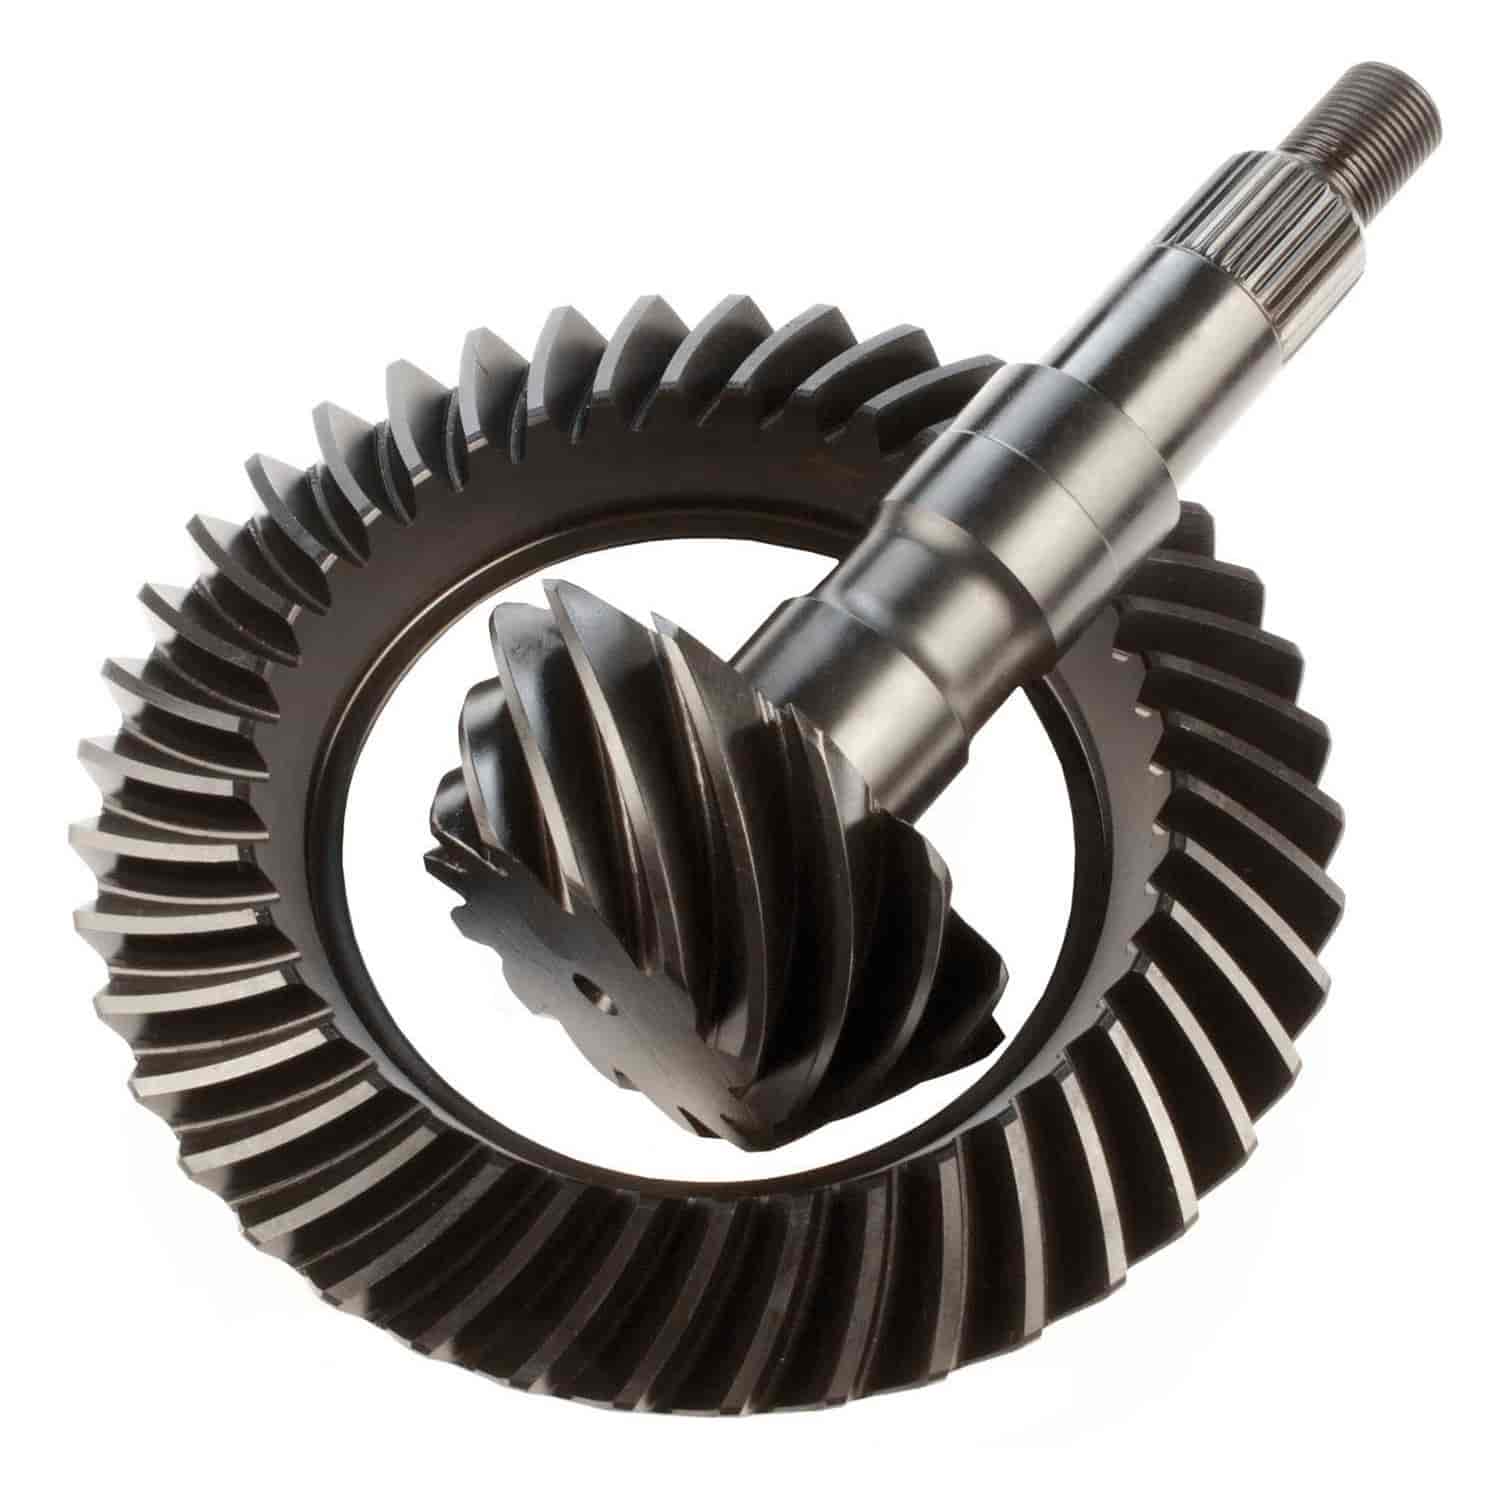 RICHMOND EXCEL 4.56 RING AND PINION & MASTER INSTALLATION KIT GM 7.625 10 BOLT